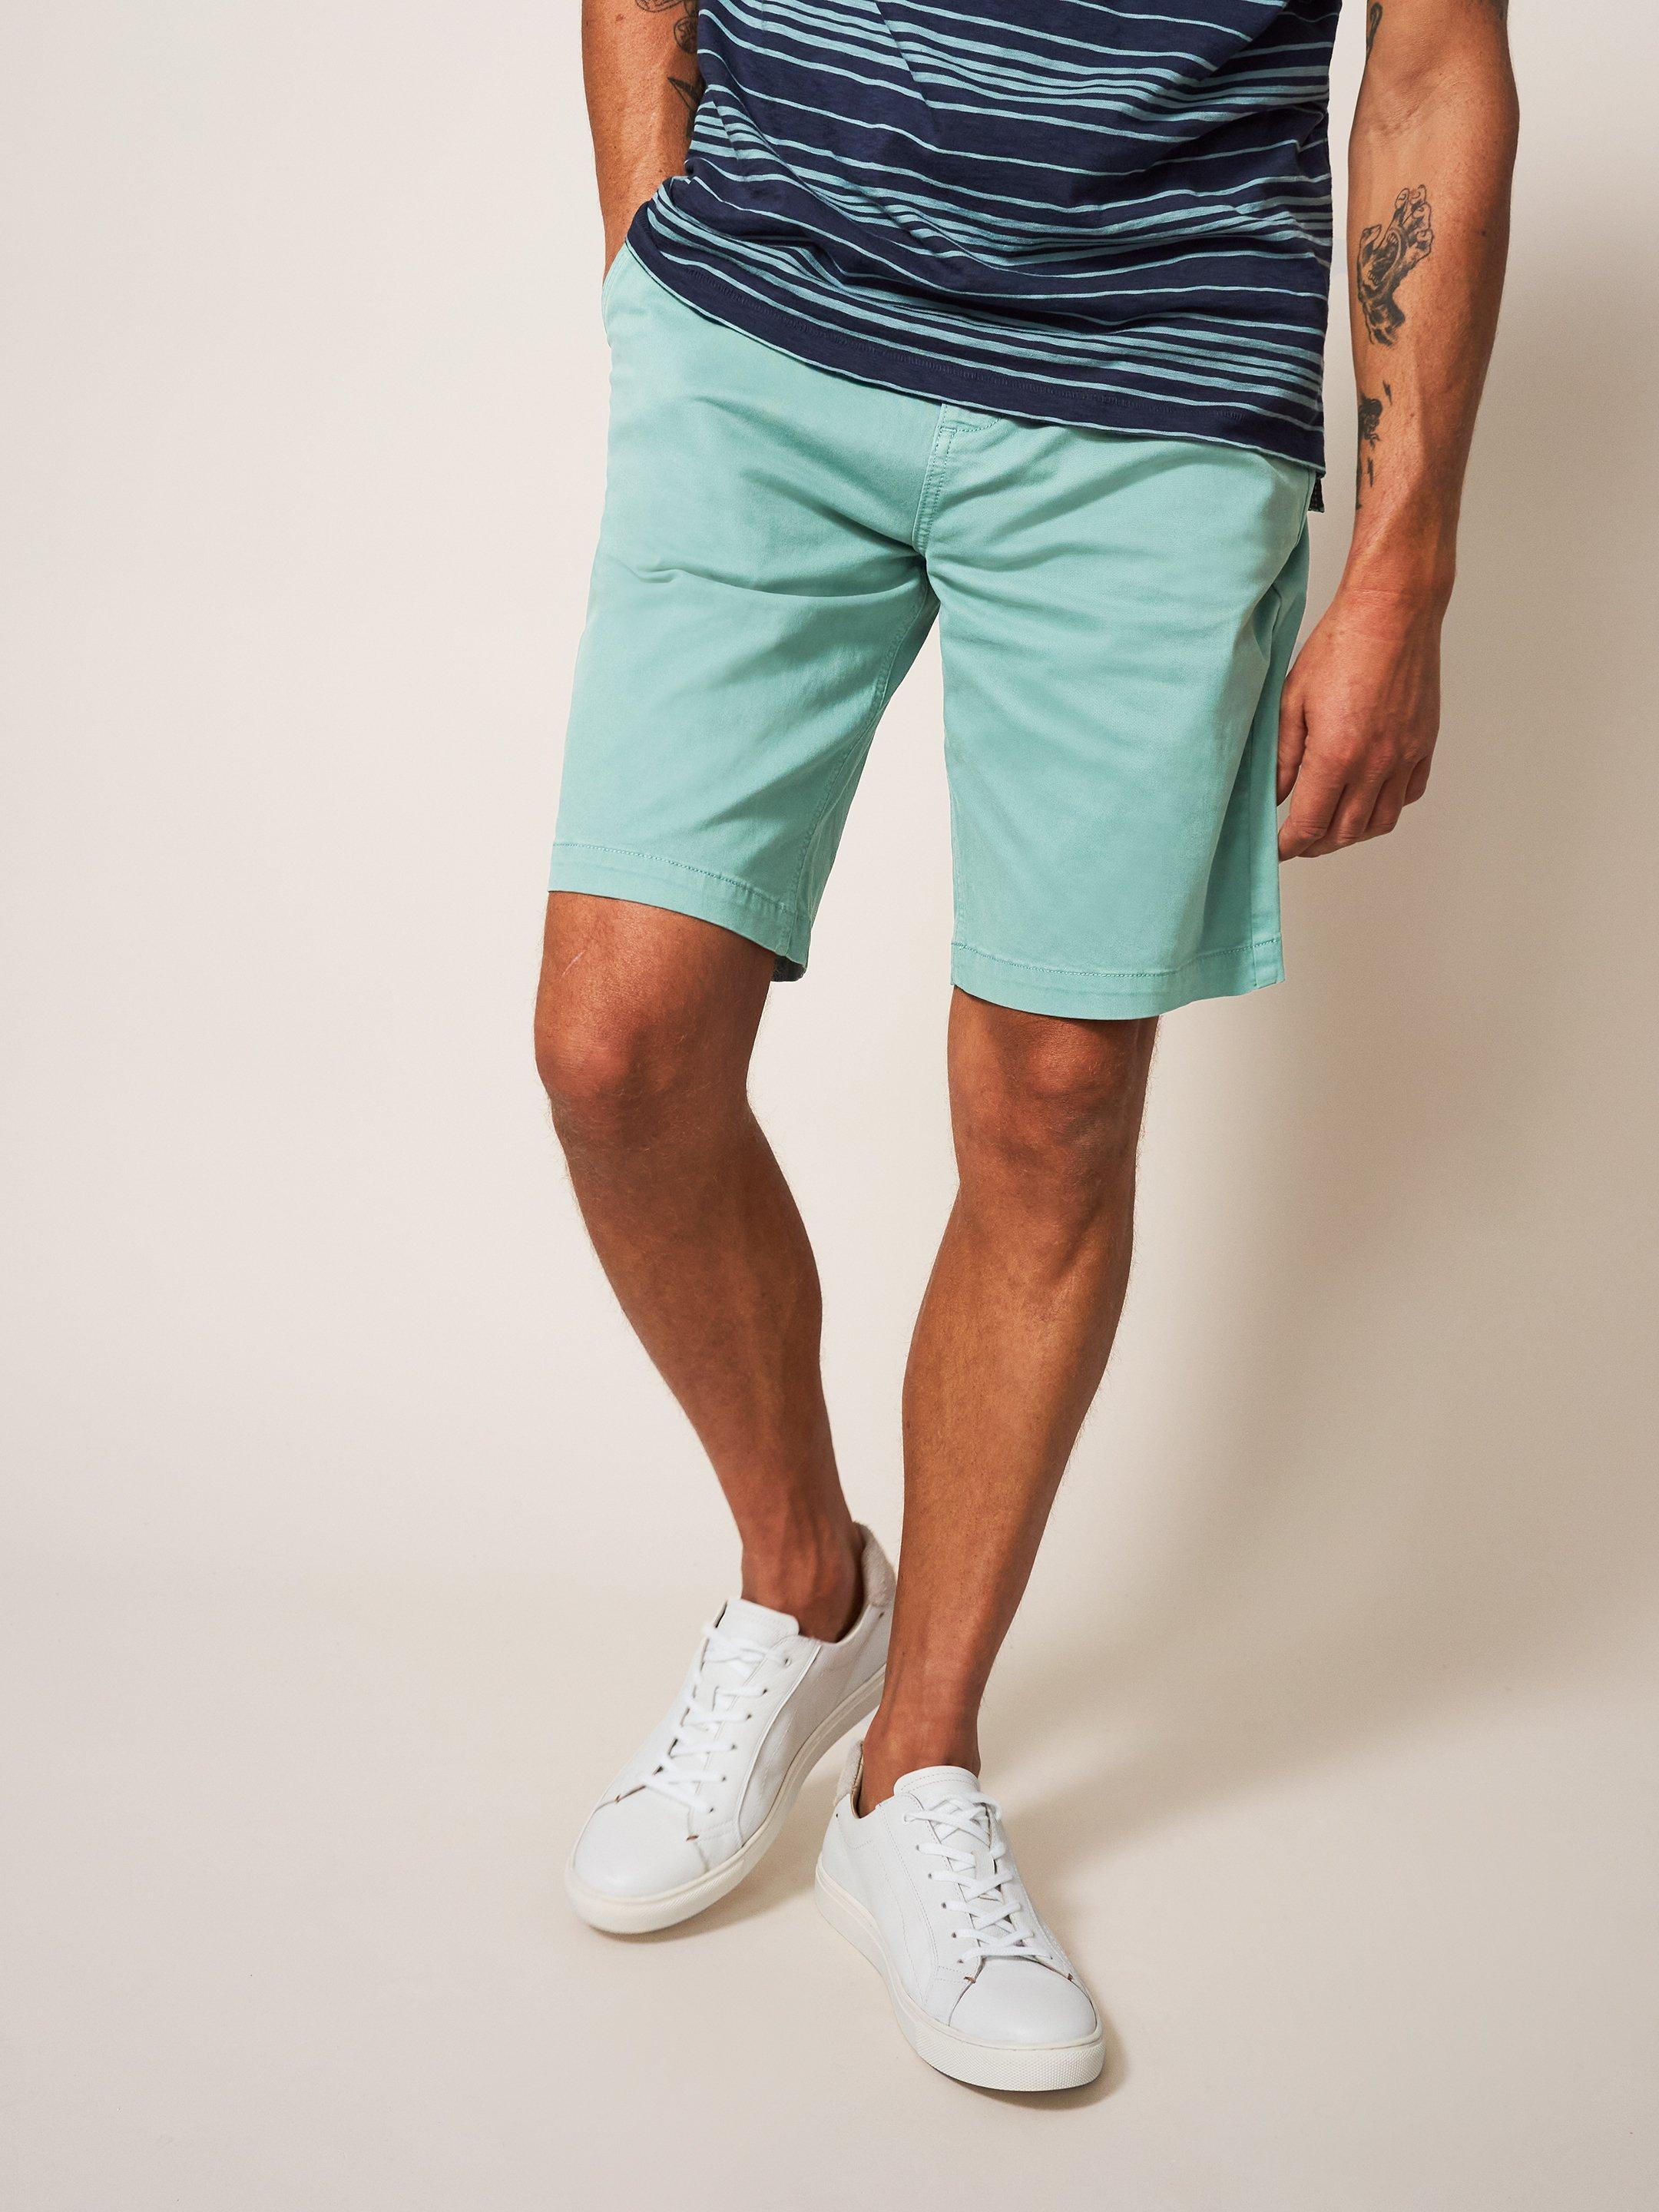 Sutton Organic Chino Short in MINT GREEN - MODEL FRONT